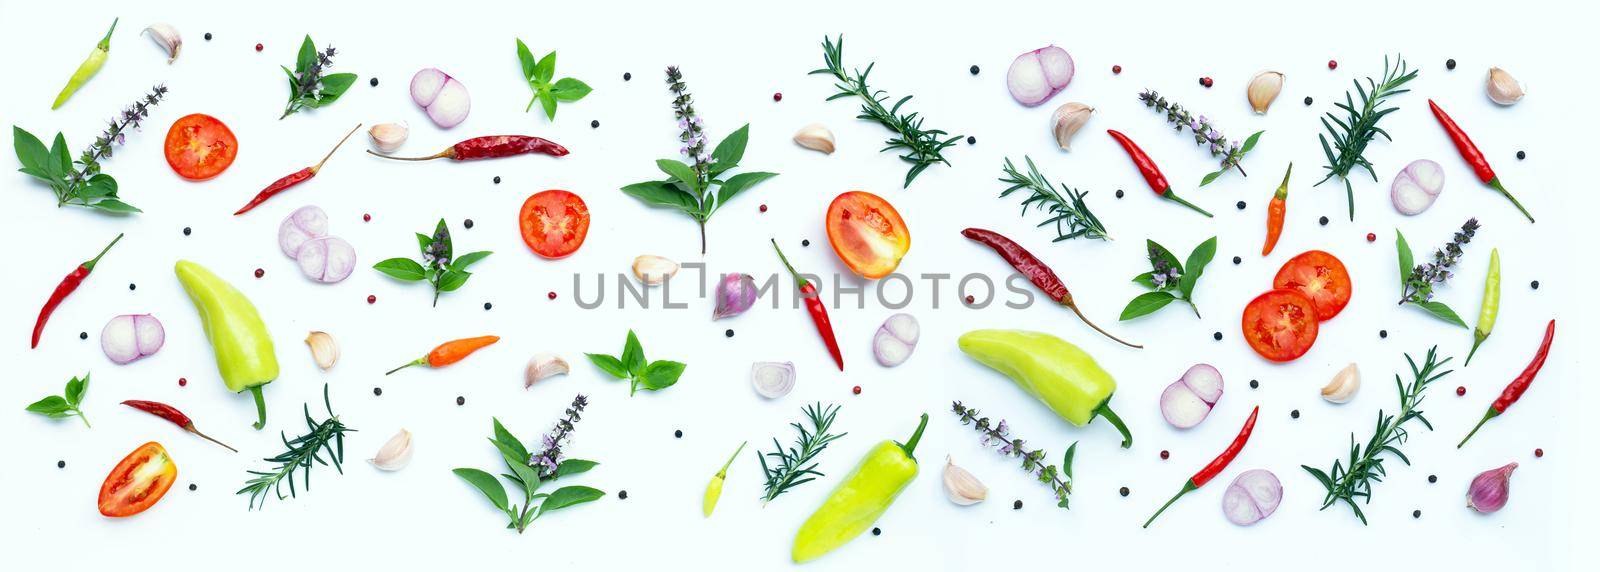 Cooking ingredients, Various fresh vegetables and herbs on white background.  by Bowonpat